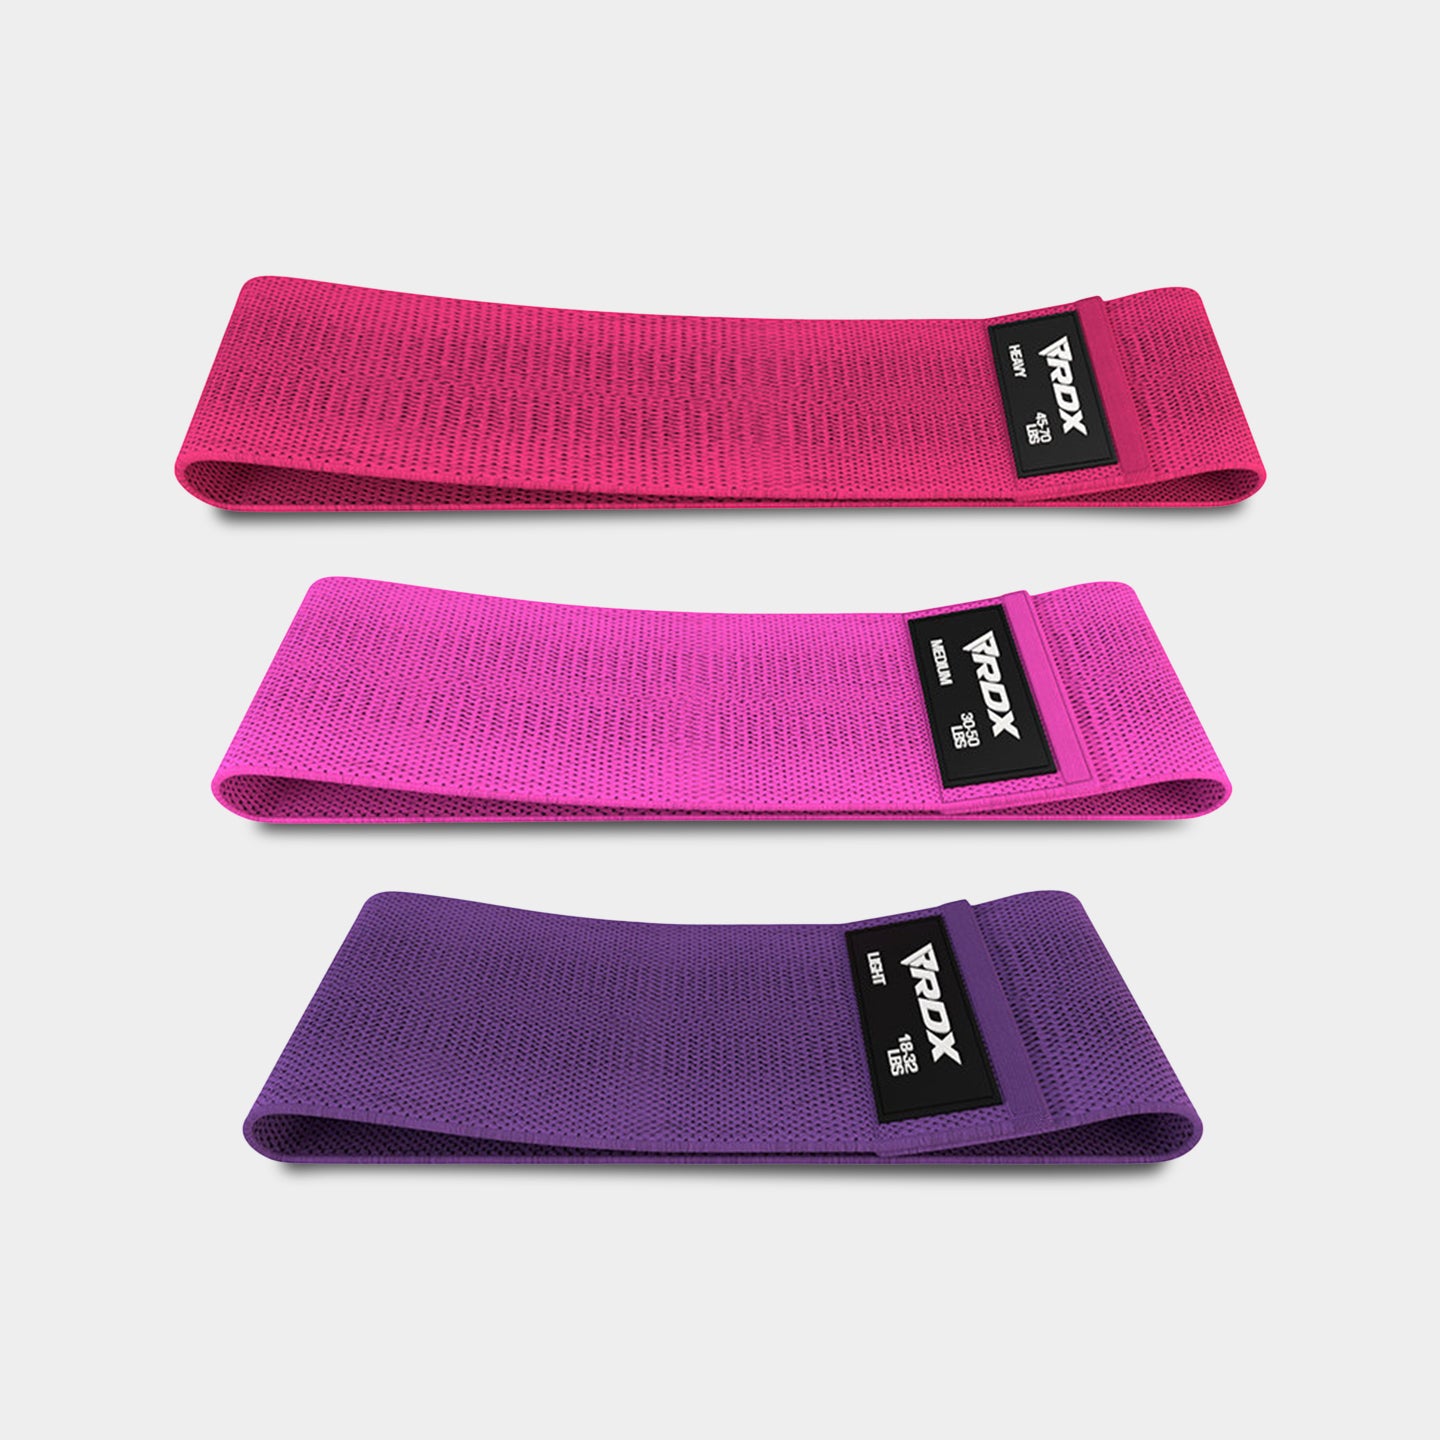 RDX Sports Heavy-Duty Fabric Resistance Training Bands for Fitness, Standard Size, Pink/Purple A1